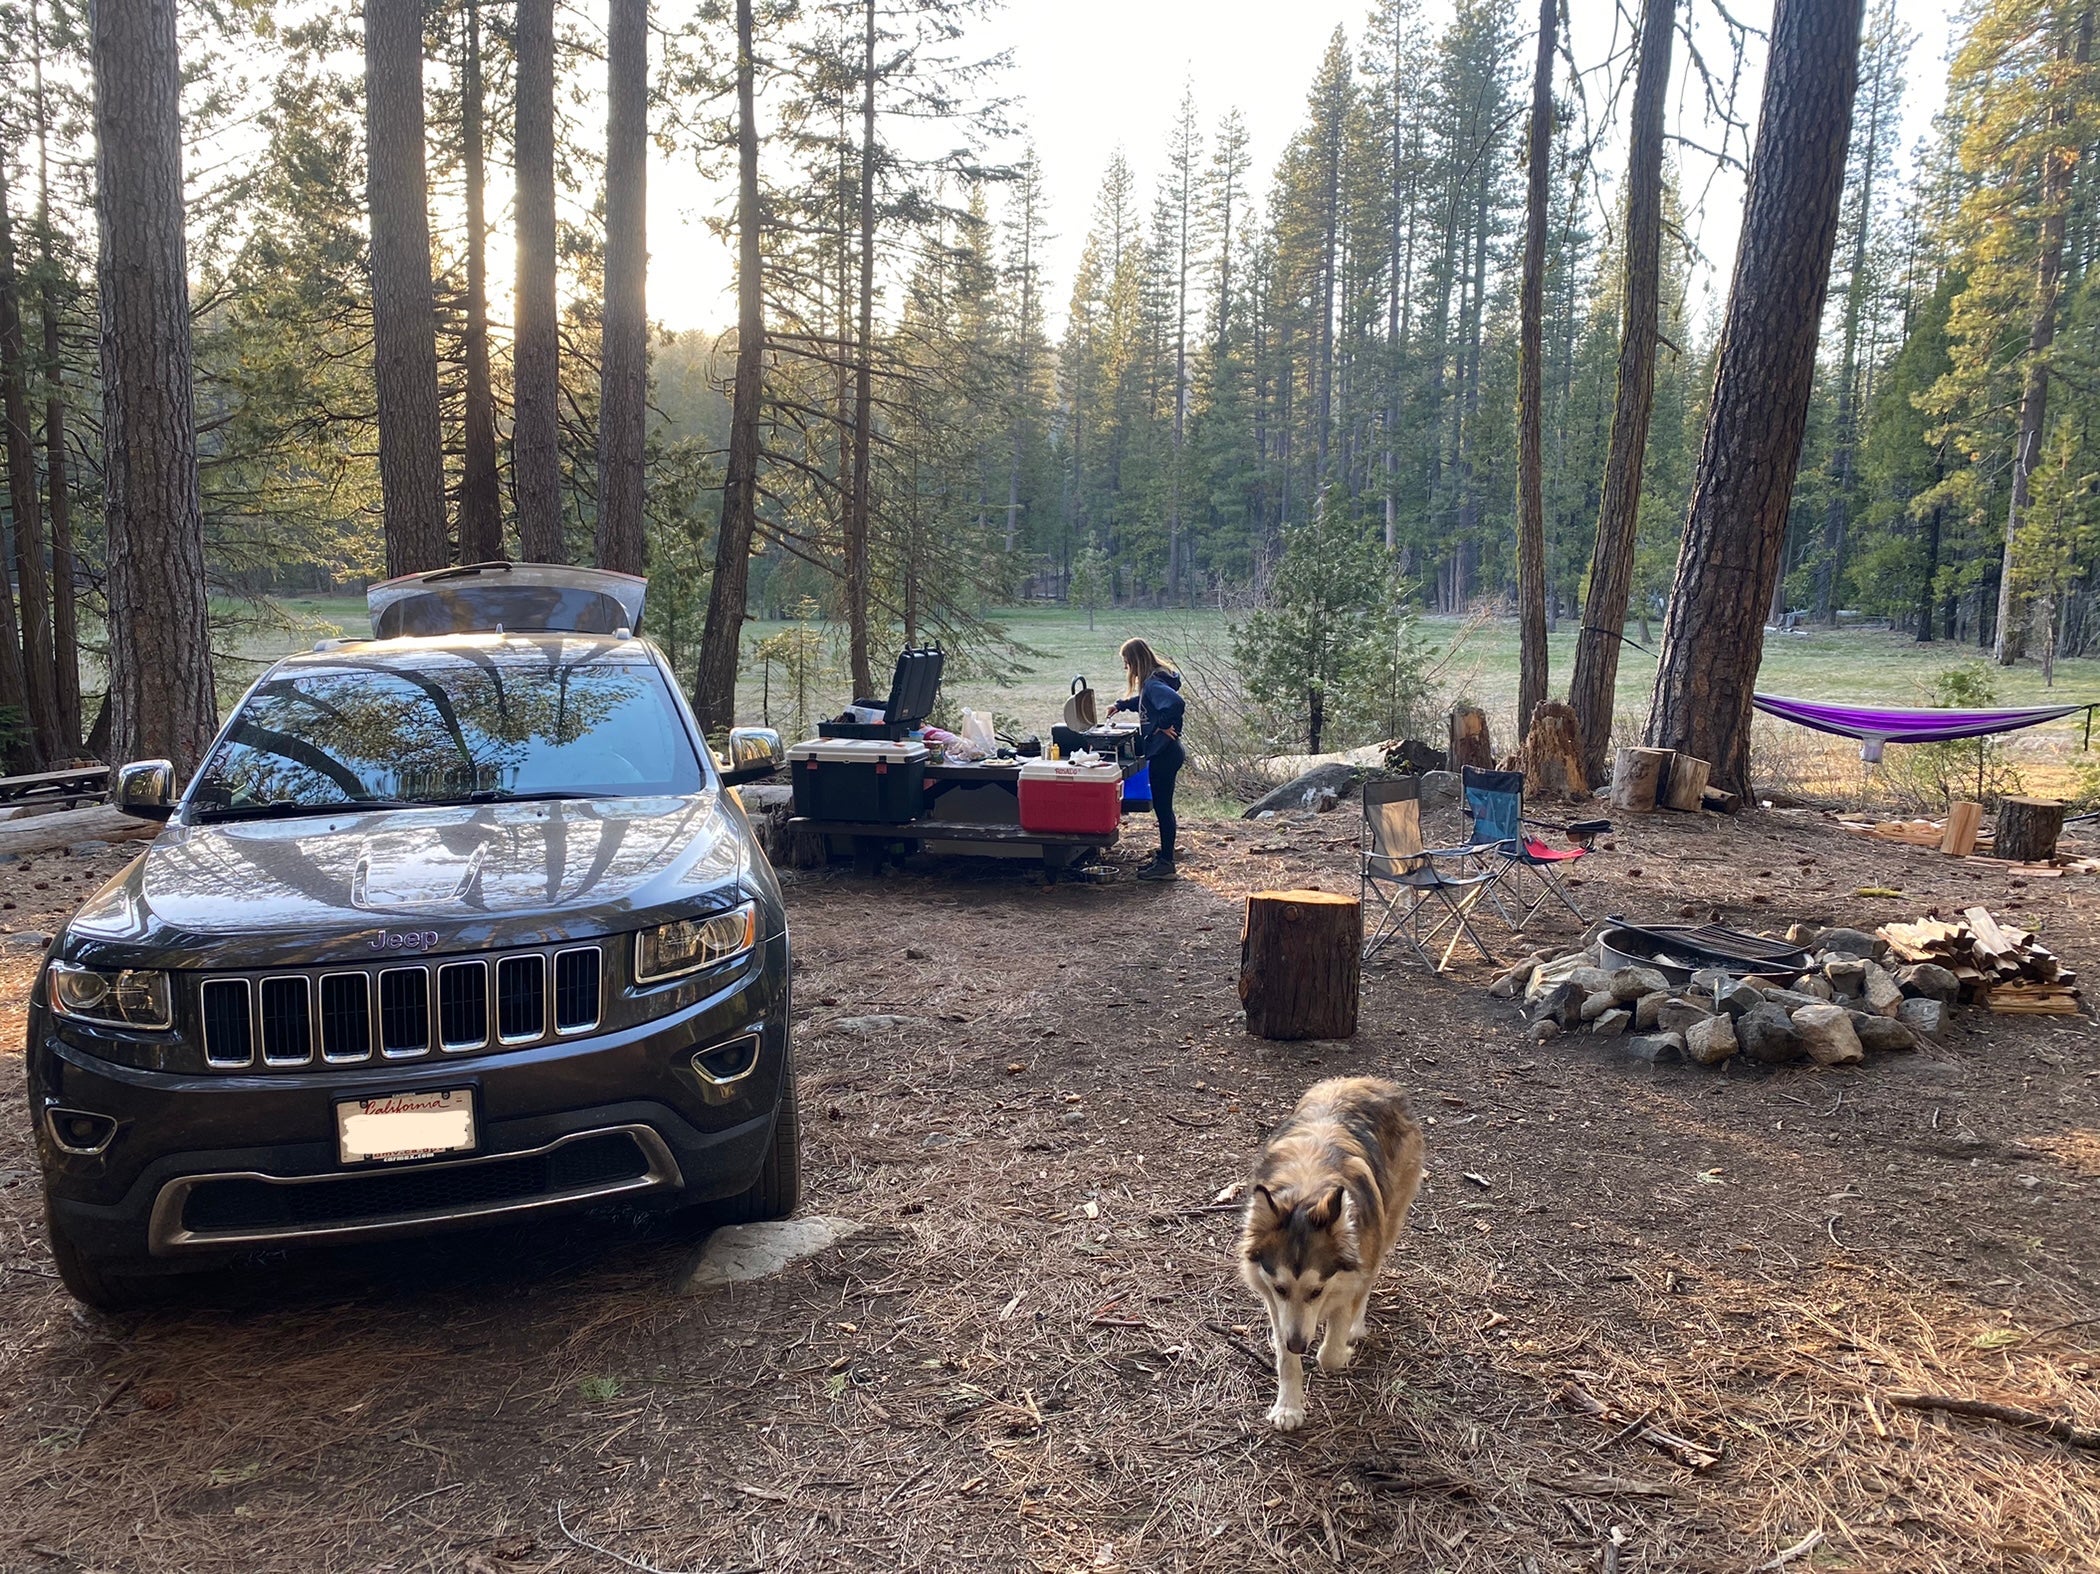 Camper submitted image from Tahoe National Forest Onion Valley Campground - 1